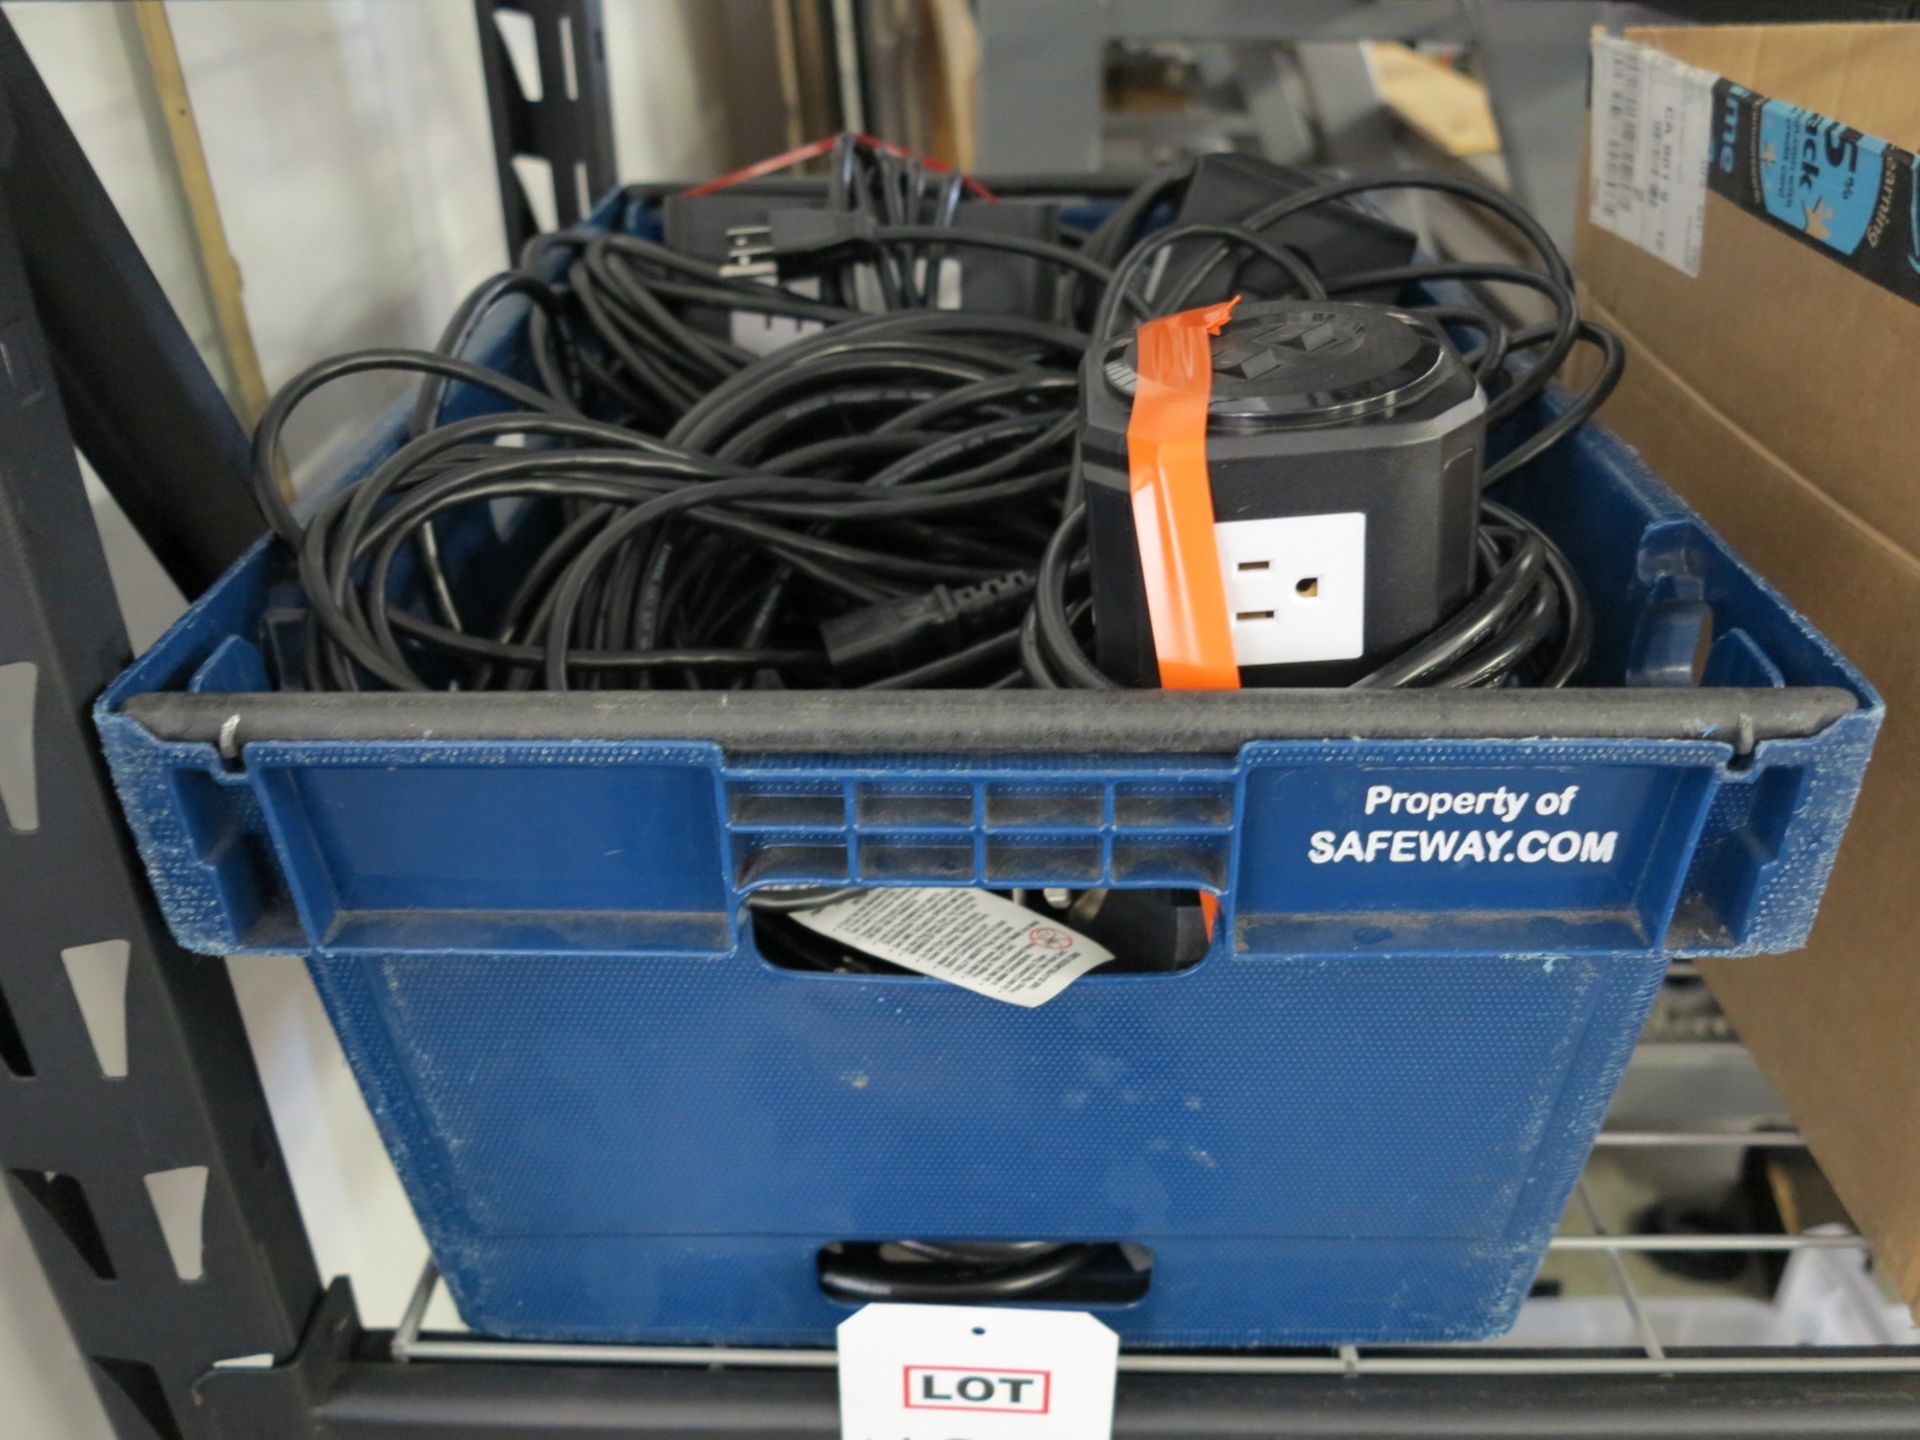 LOT - TUB OF EXTENSION CORDS AND OUTLET HUBS